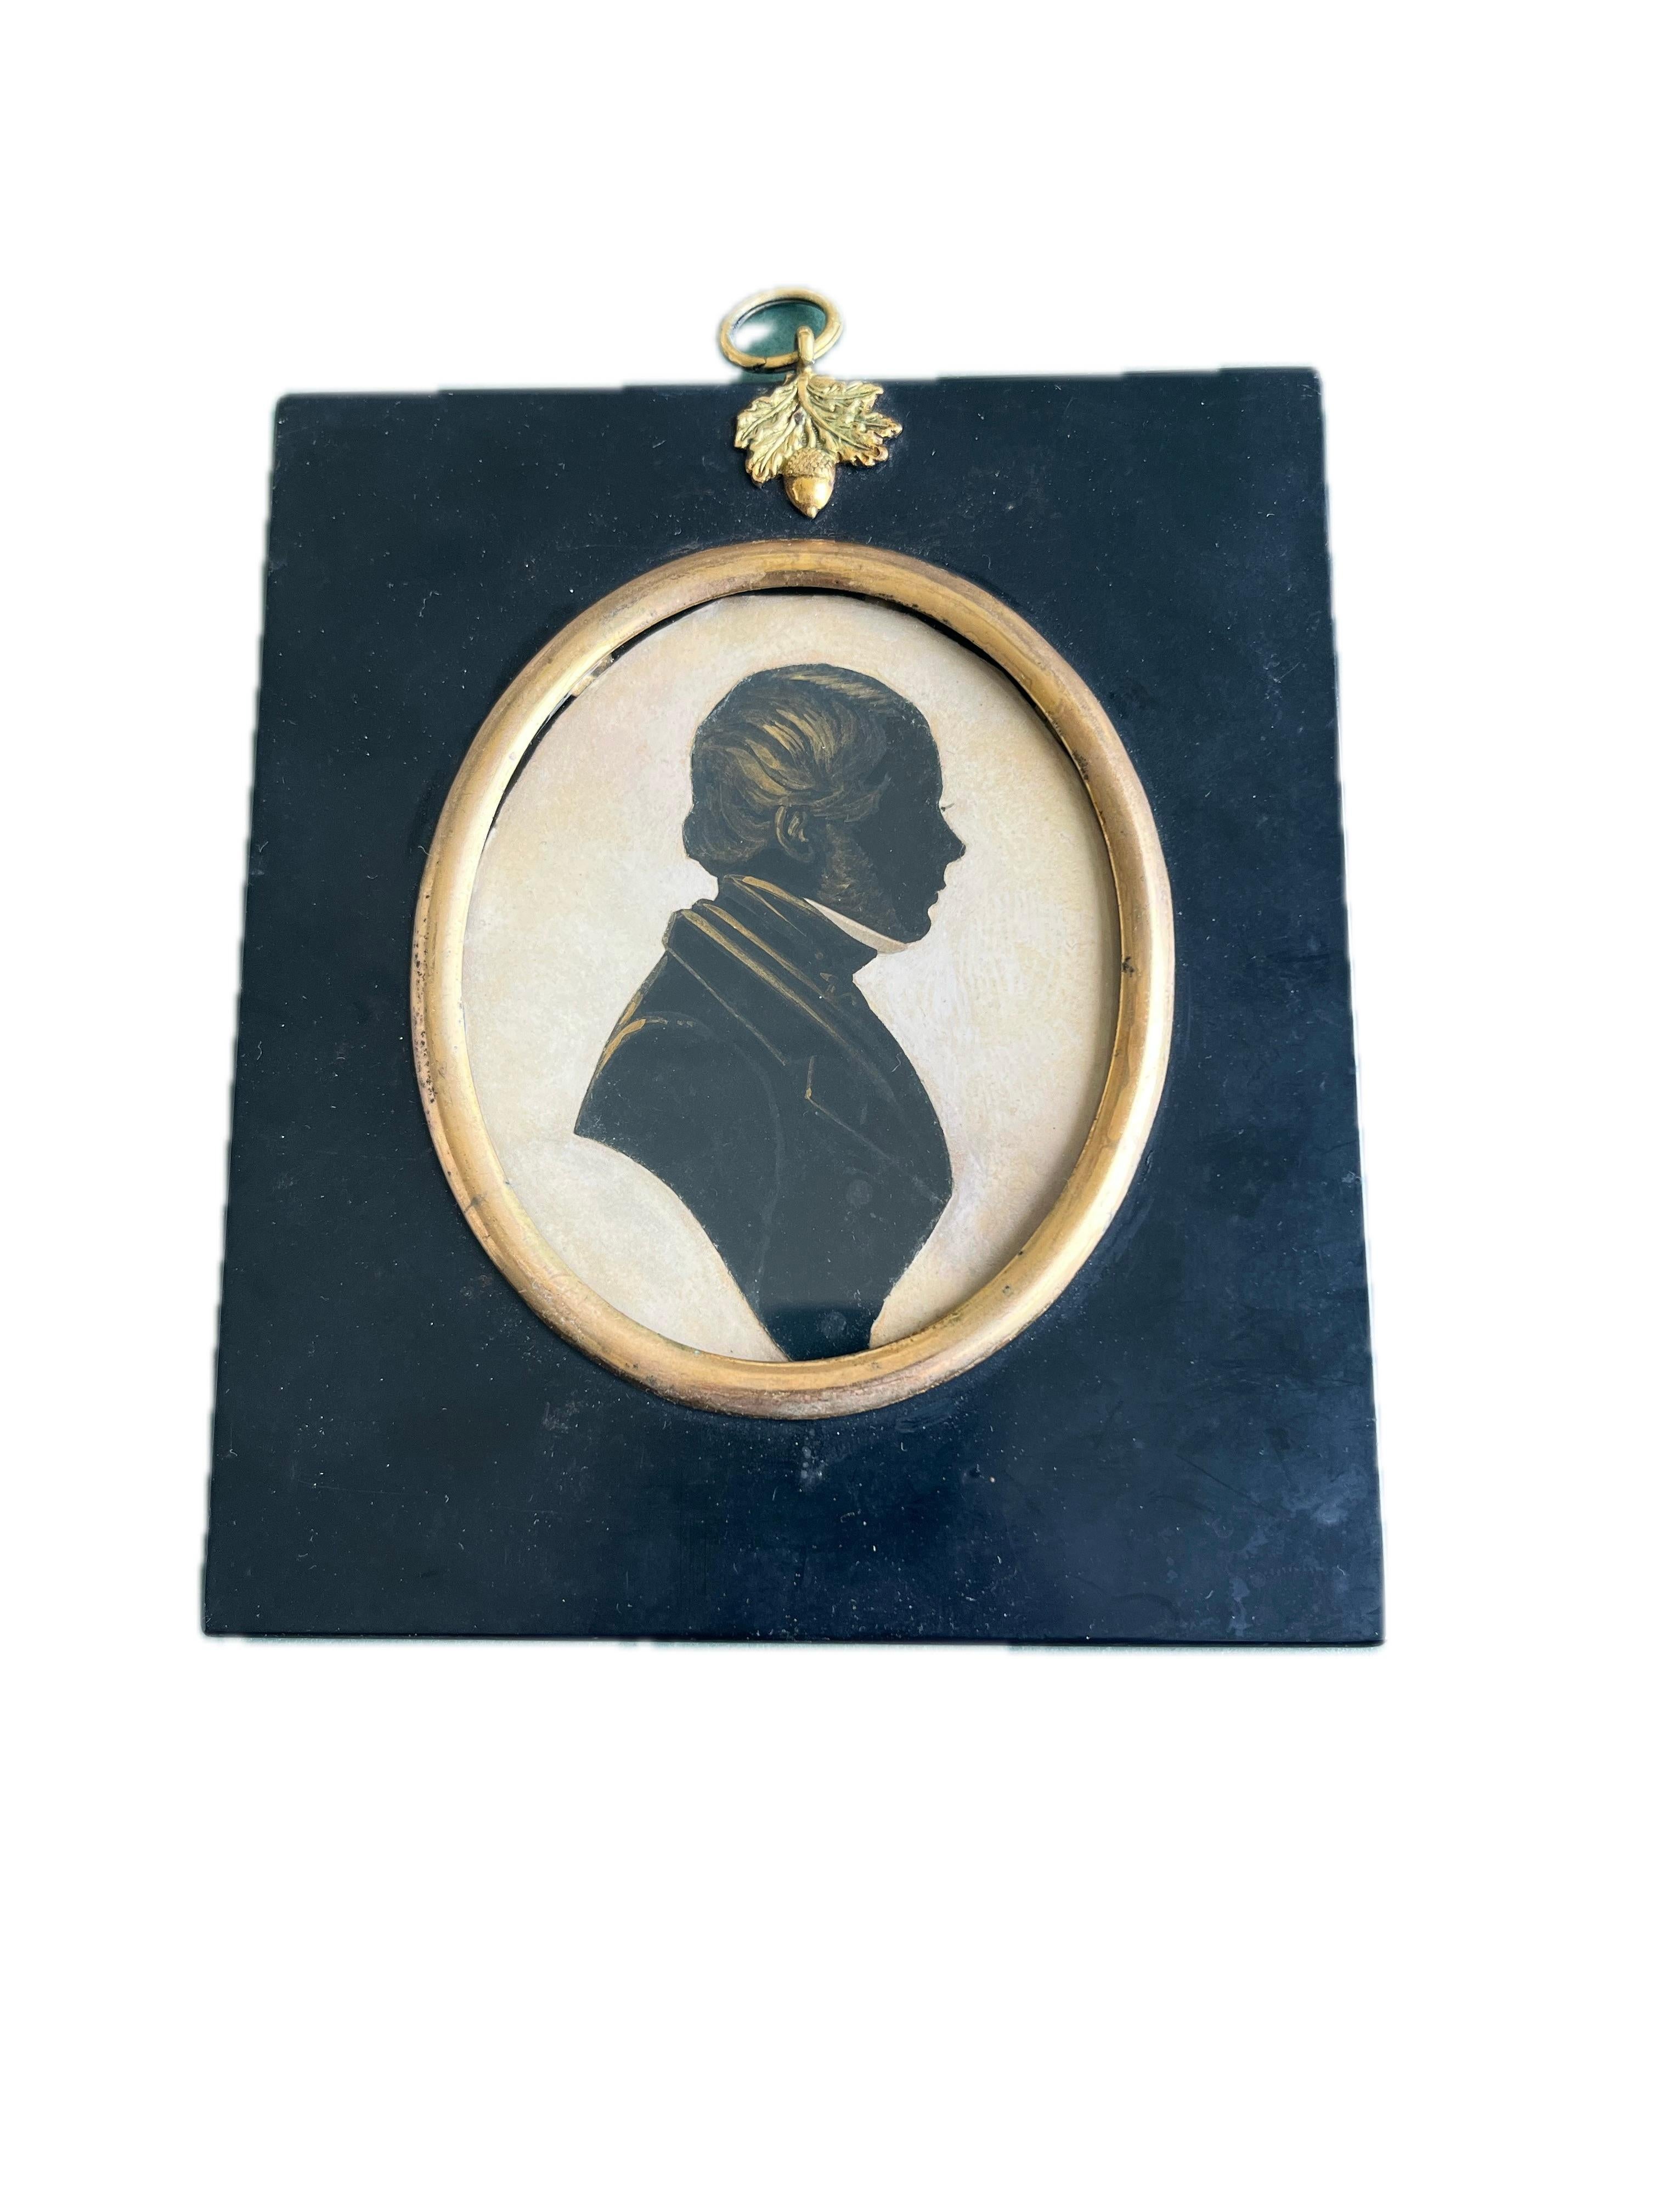 A finely detailed silhouette a Victorian gentleman

Peter Skeolan (1815-1871)
Portrait of a gentleman, profile to the right, wearing coat and cravat
Watercolour on gold highlighting on paper/card
Stencilled with artist's details to the reverse
3¼ x